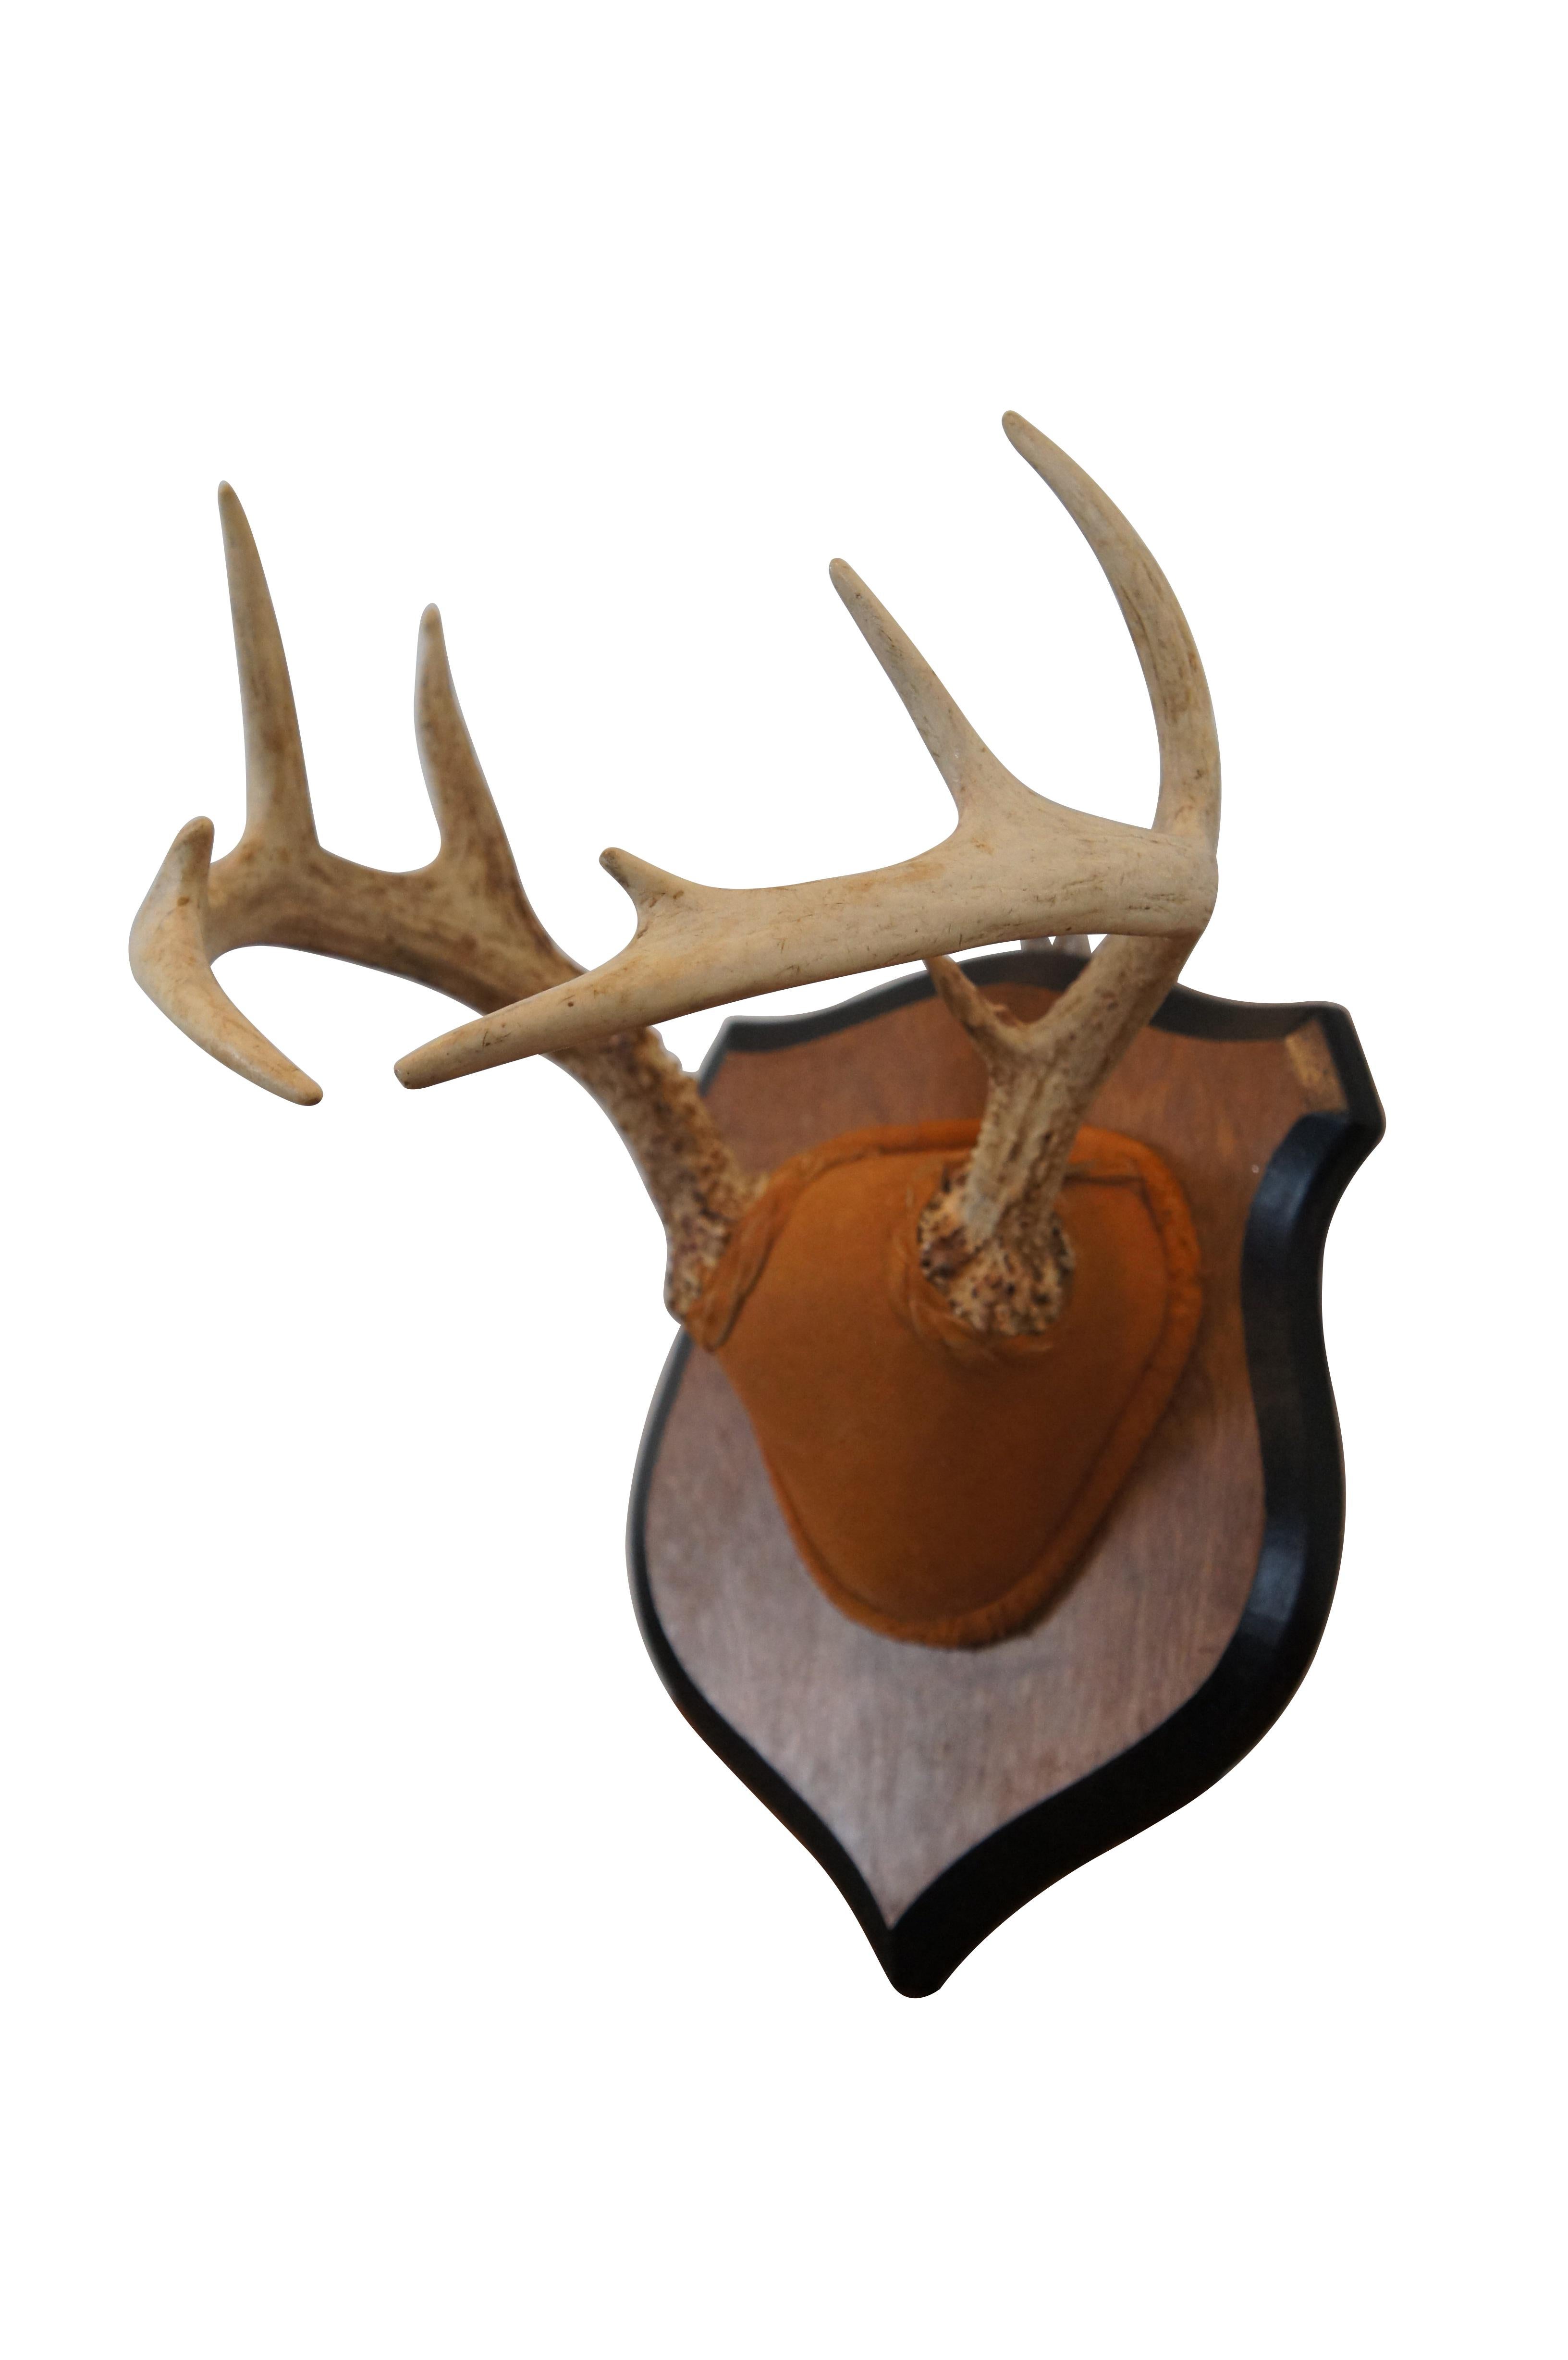 Vintage taxidermy trophy of a ten point deer antler rack with suede leather over the skull cap, mounted to a heraldic shield plaque.

Dimensions:
9” x 13.5” x 14.25” (Width x Depth x Height)